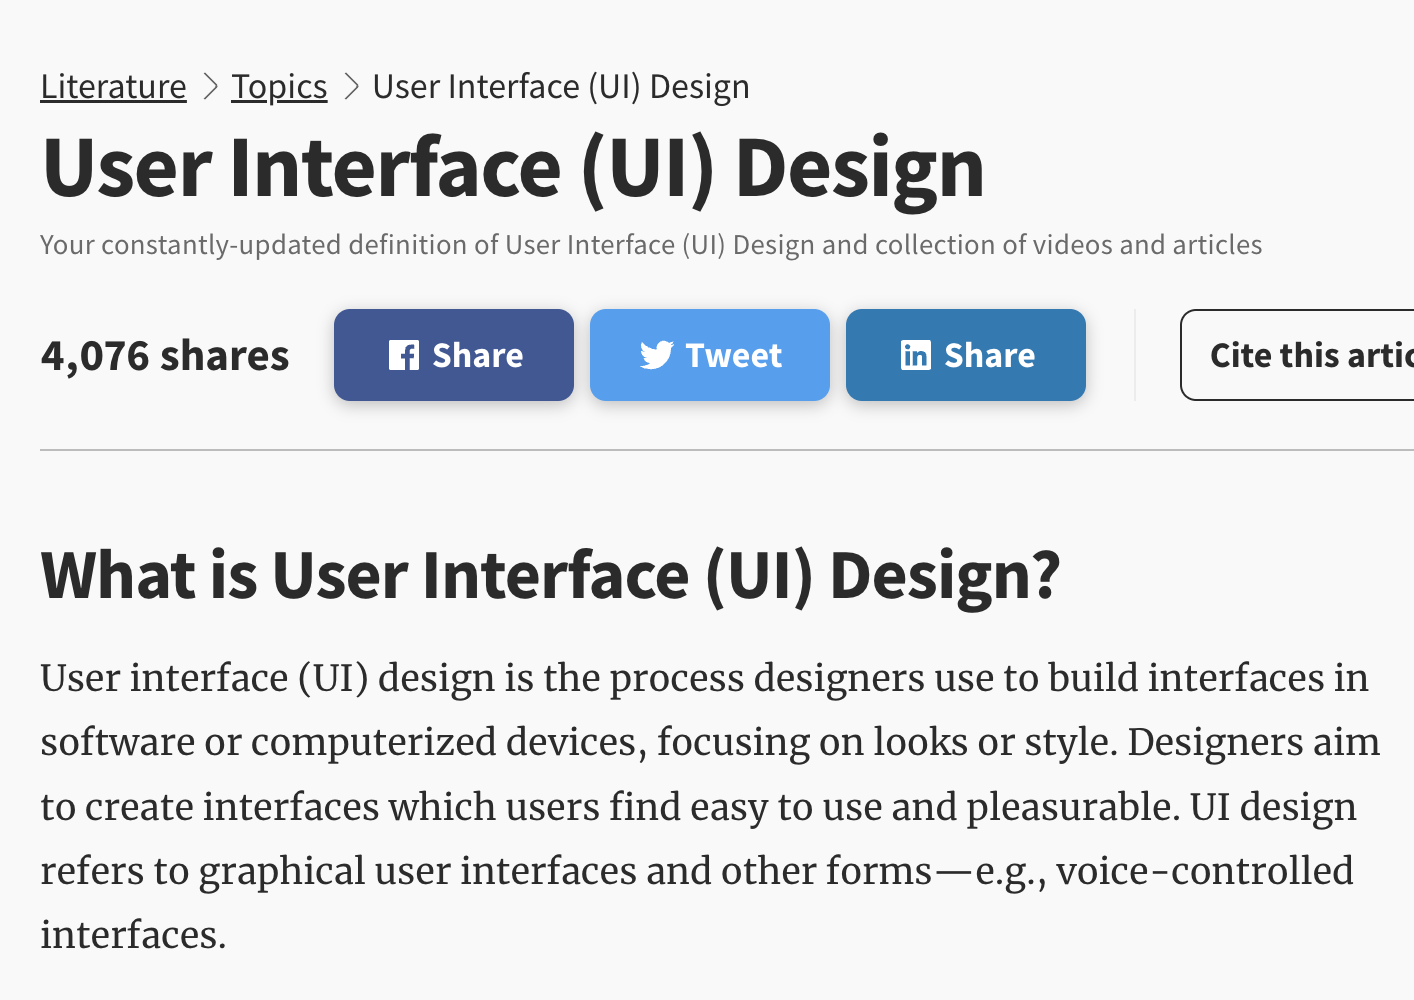 Interaction Design Foundation's article introduction